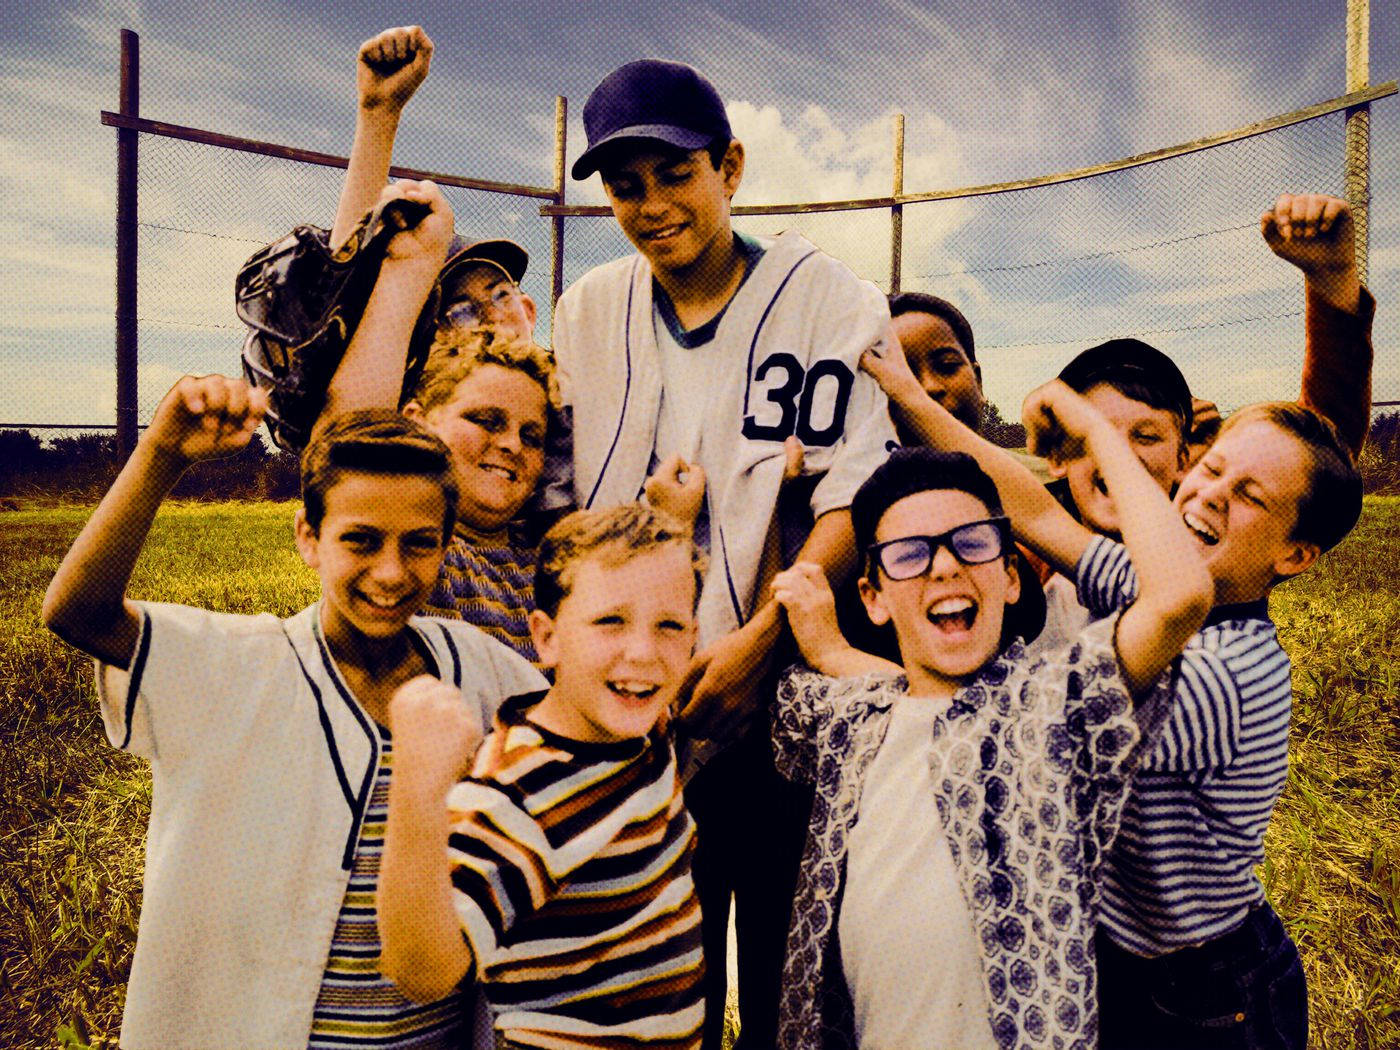 "The Sandlot - A story of friendship and adventure" Wallpaper